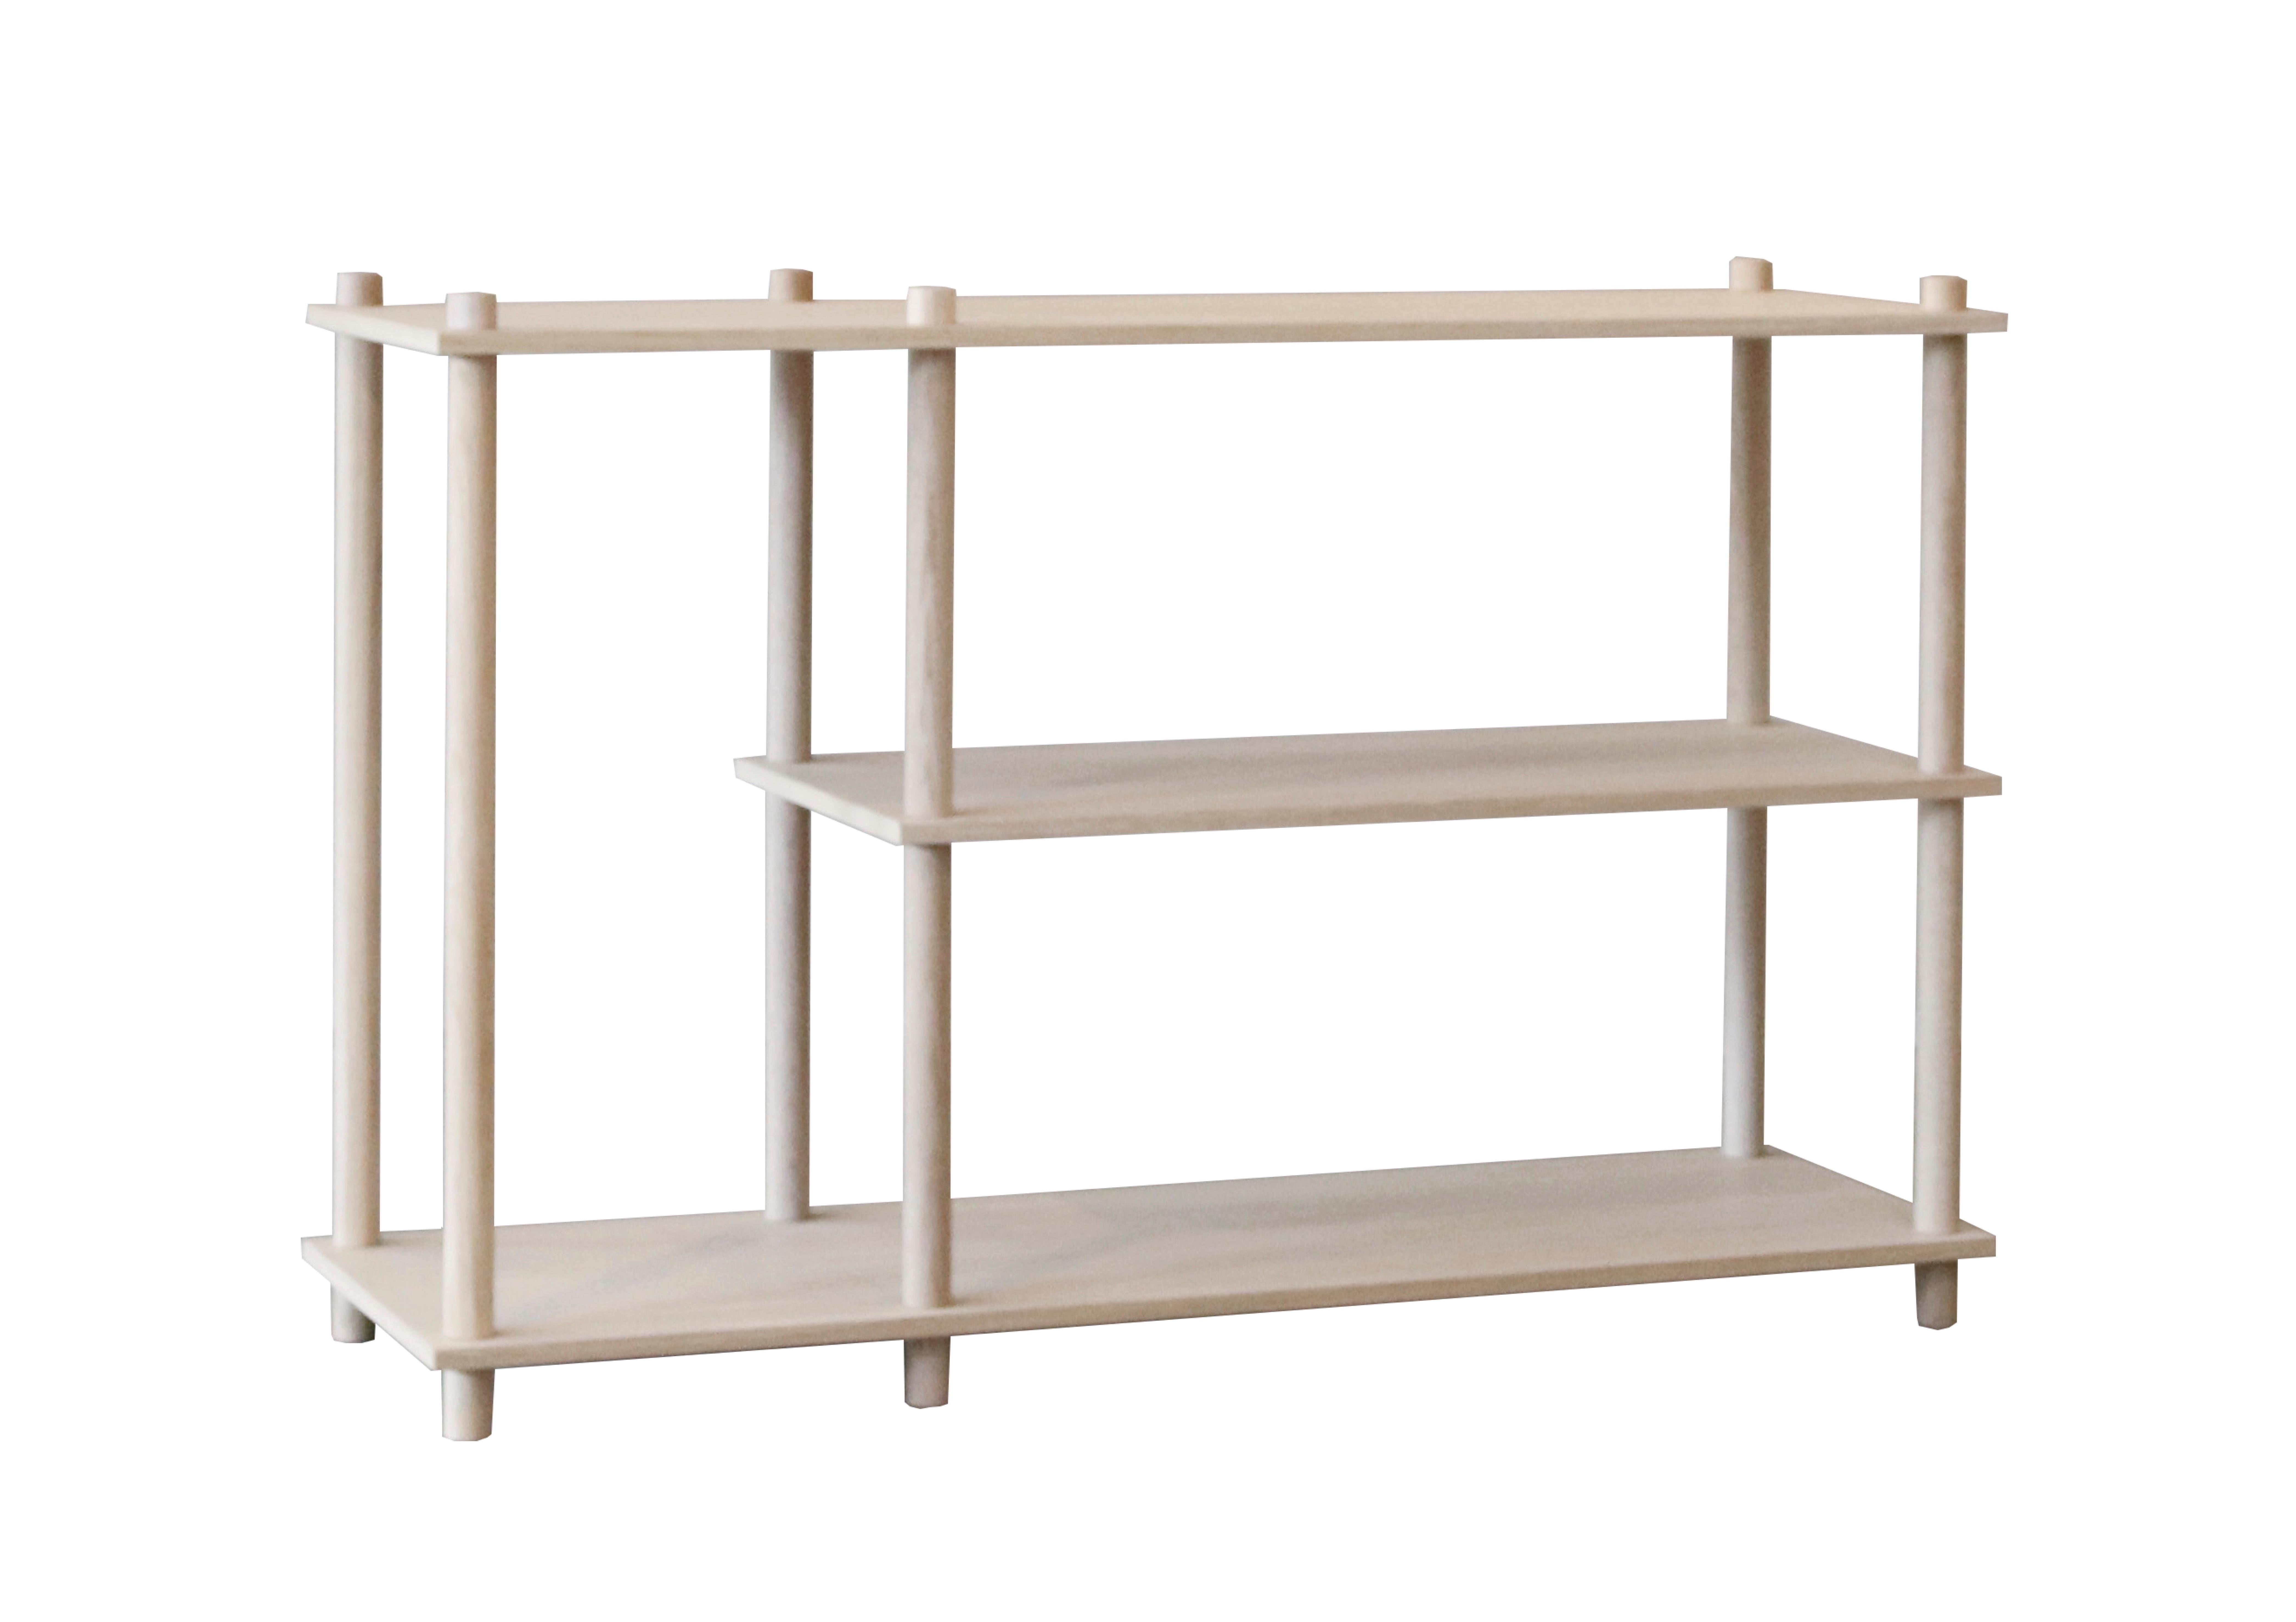 Oak elevate shelving III by Camilla Akersveen and Christopher Konings.
Materials: metal, oak.
Dimensions: D 40 x W 120 x H 78.7 cm.
Available in matt lacquered oak or black oak. Different shelving sistems available.

Camilla Akersveen and